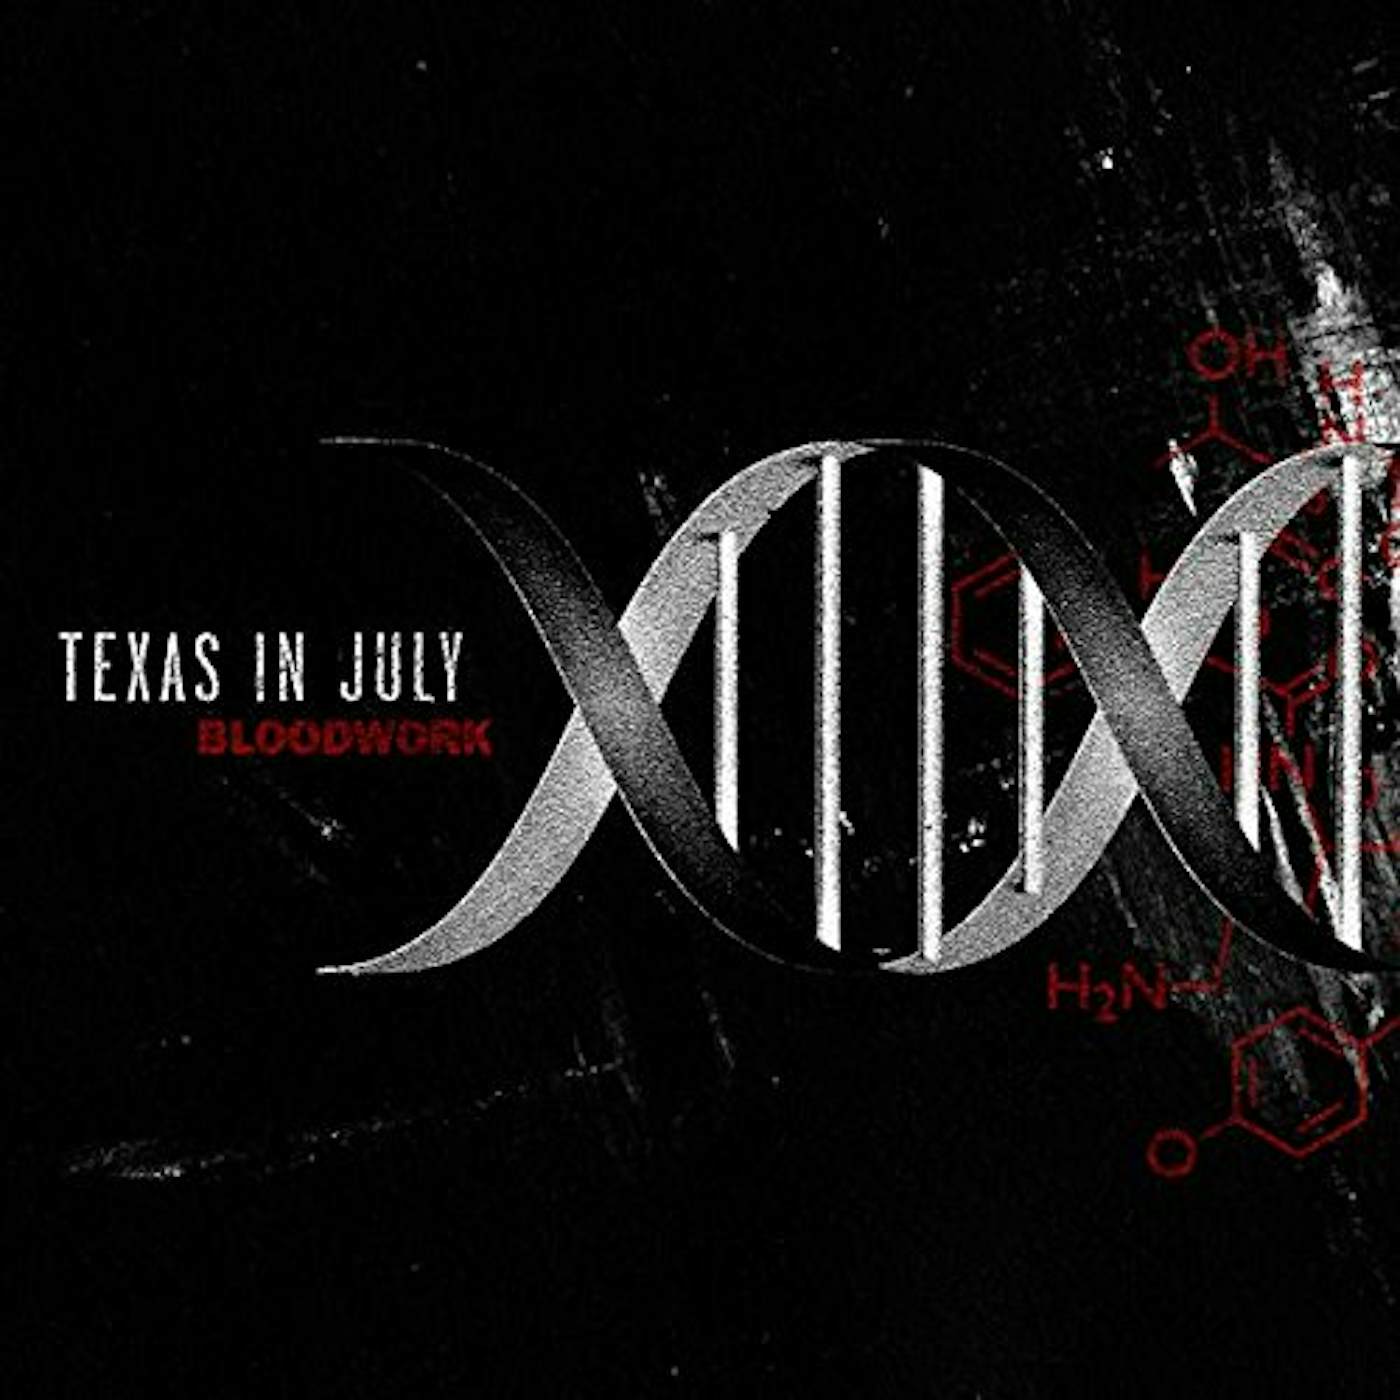 Texas In July Bloodwork Vinyl Record